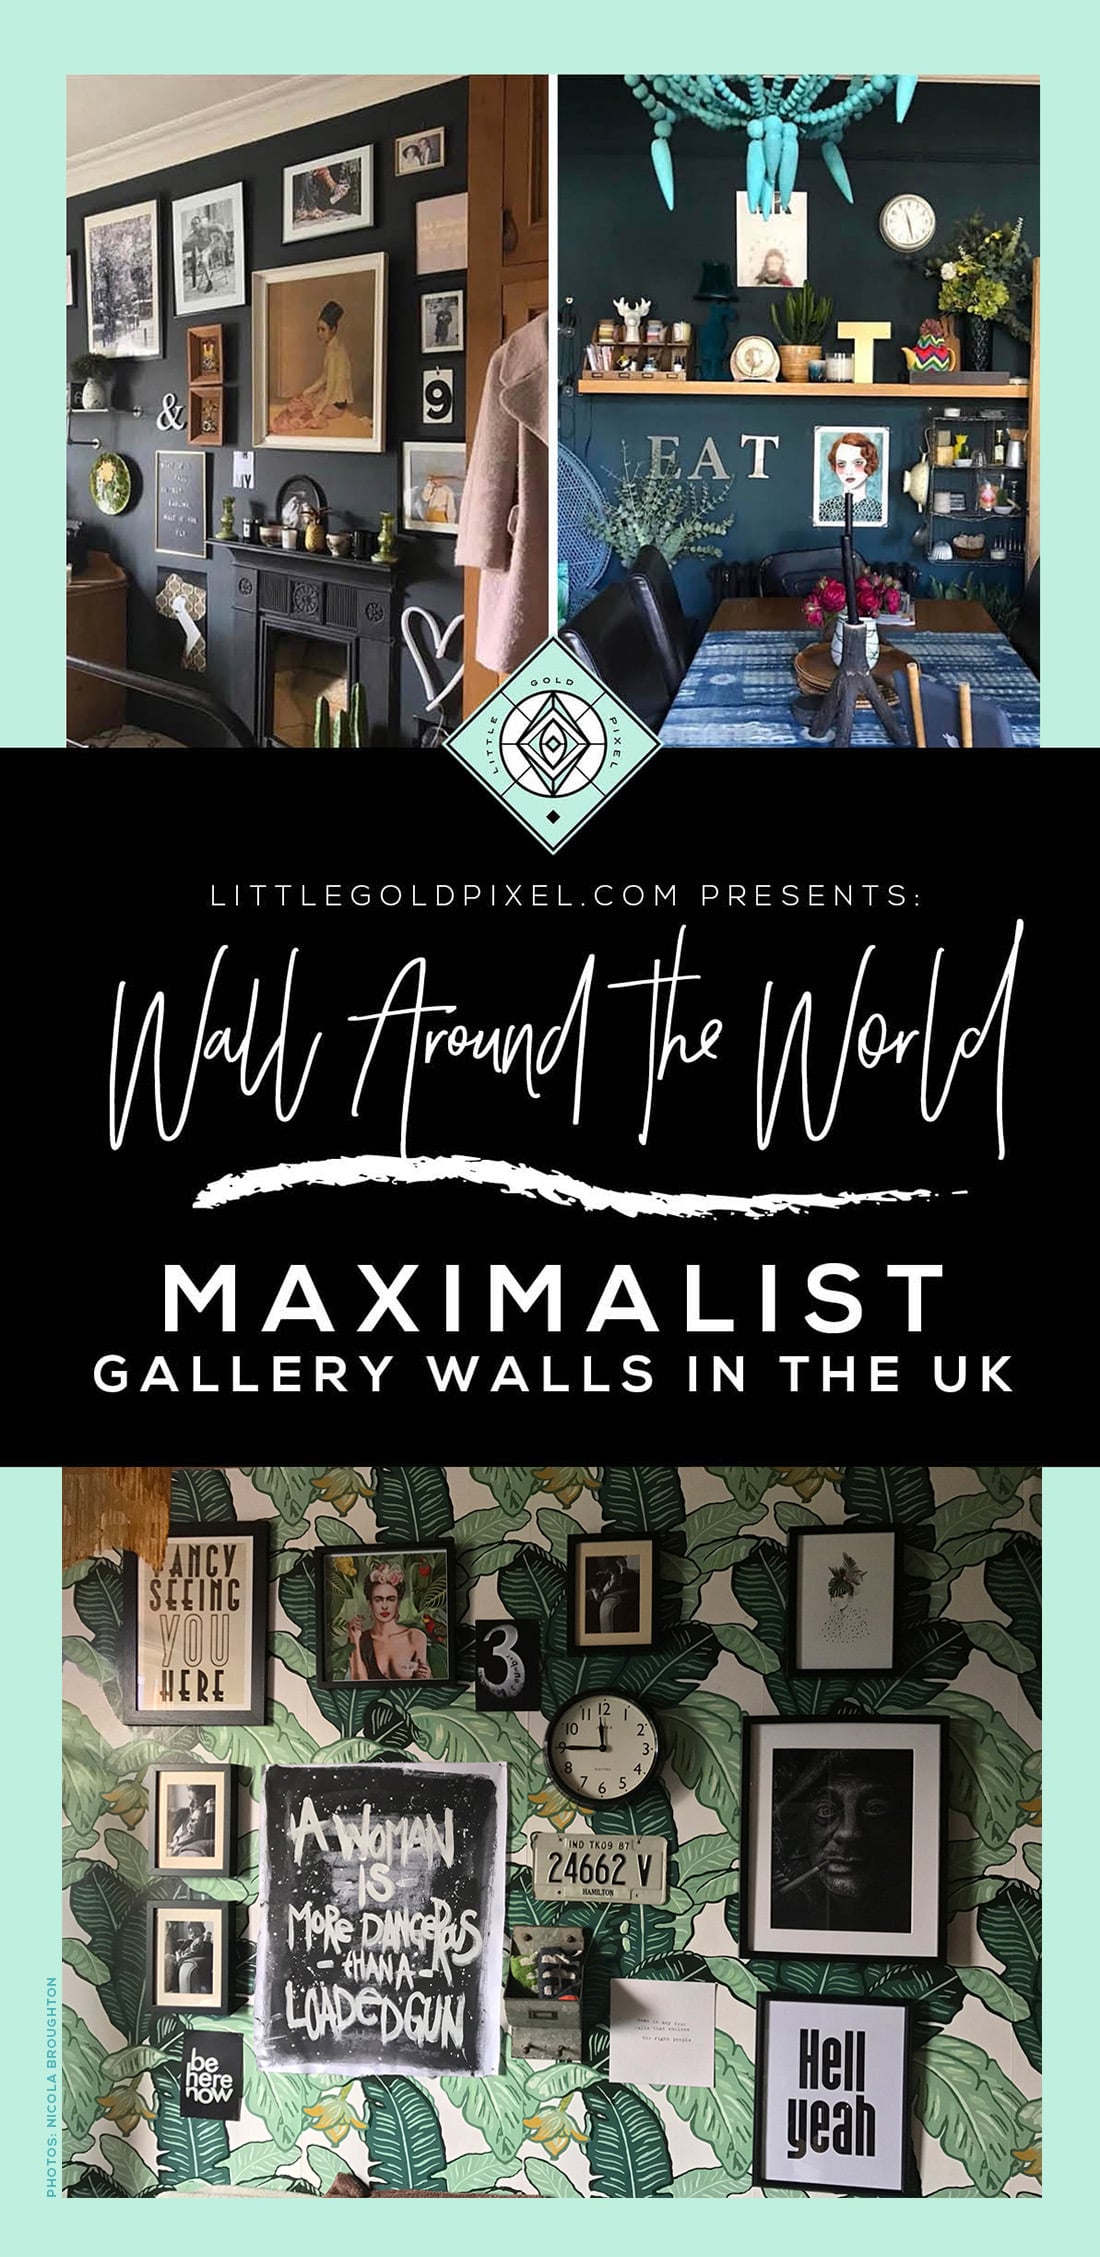 Wall Around the World: A Gallery Wall Series by Little Gold Pixel • Part 2: Maximalist Gallery Walls in the UK • All photos ©Nicola Broughton